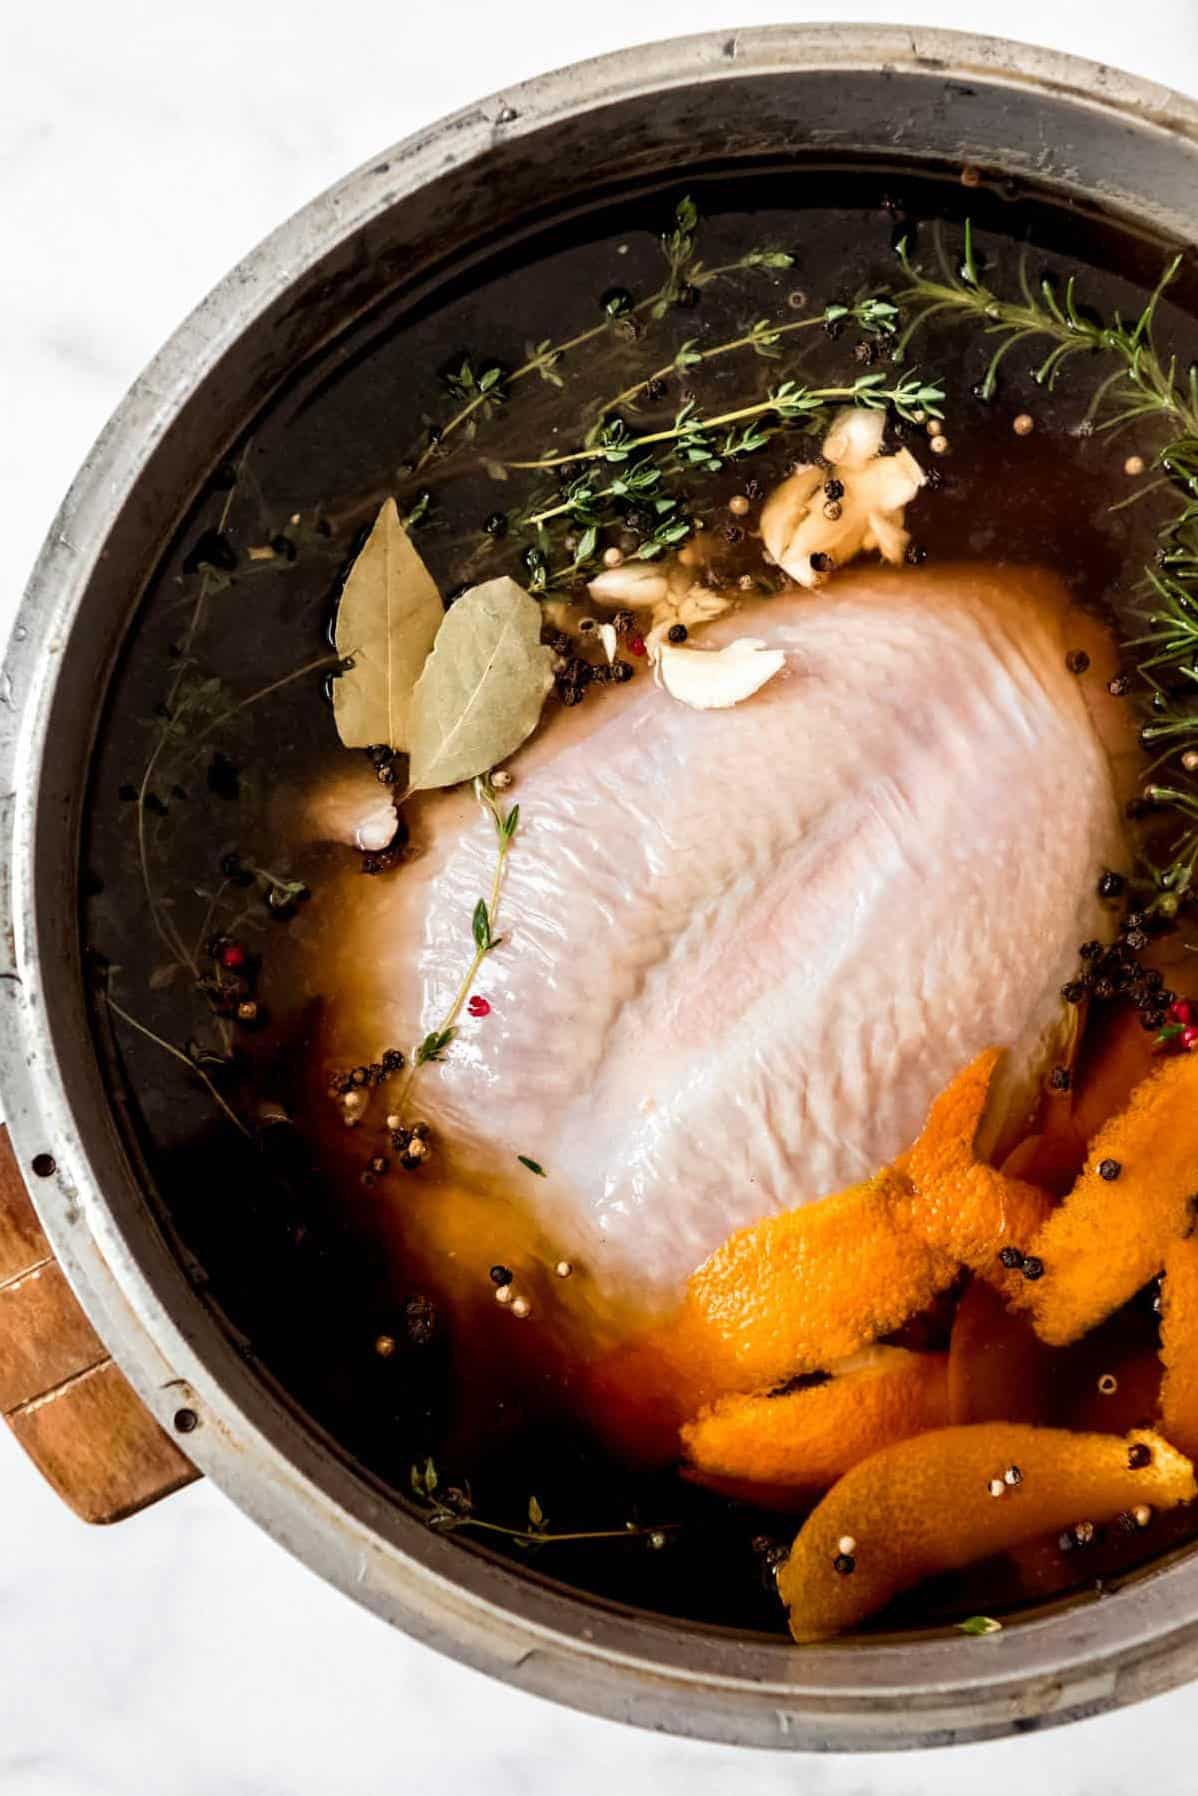  Brine your turkey to perfection with this easy recipe.